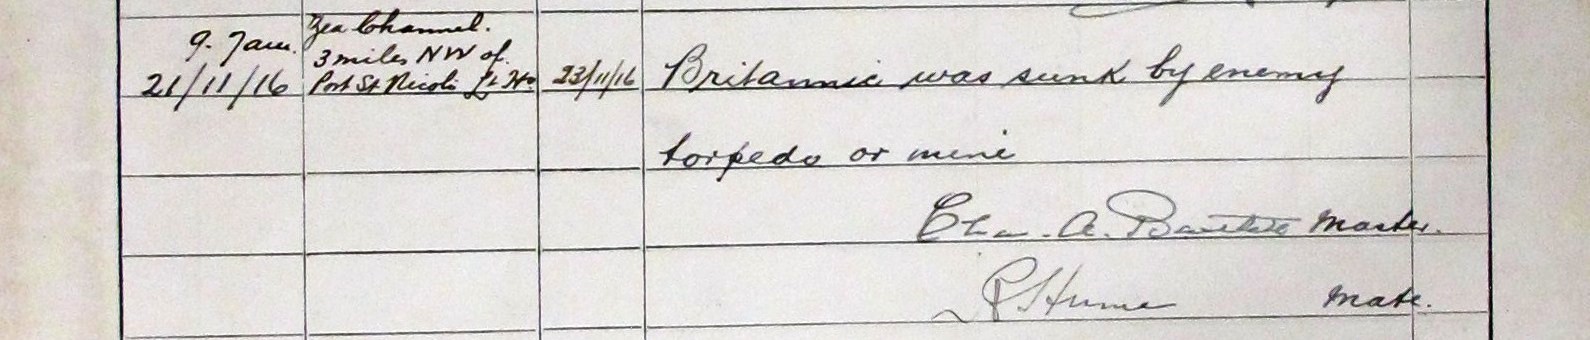 Image of the last entry in official log book of Britannic